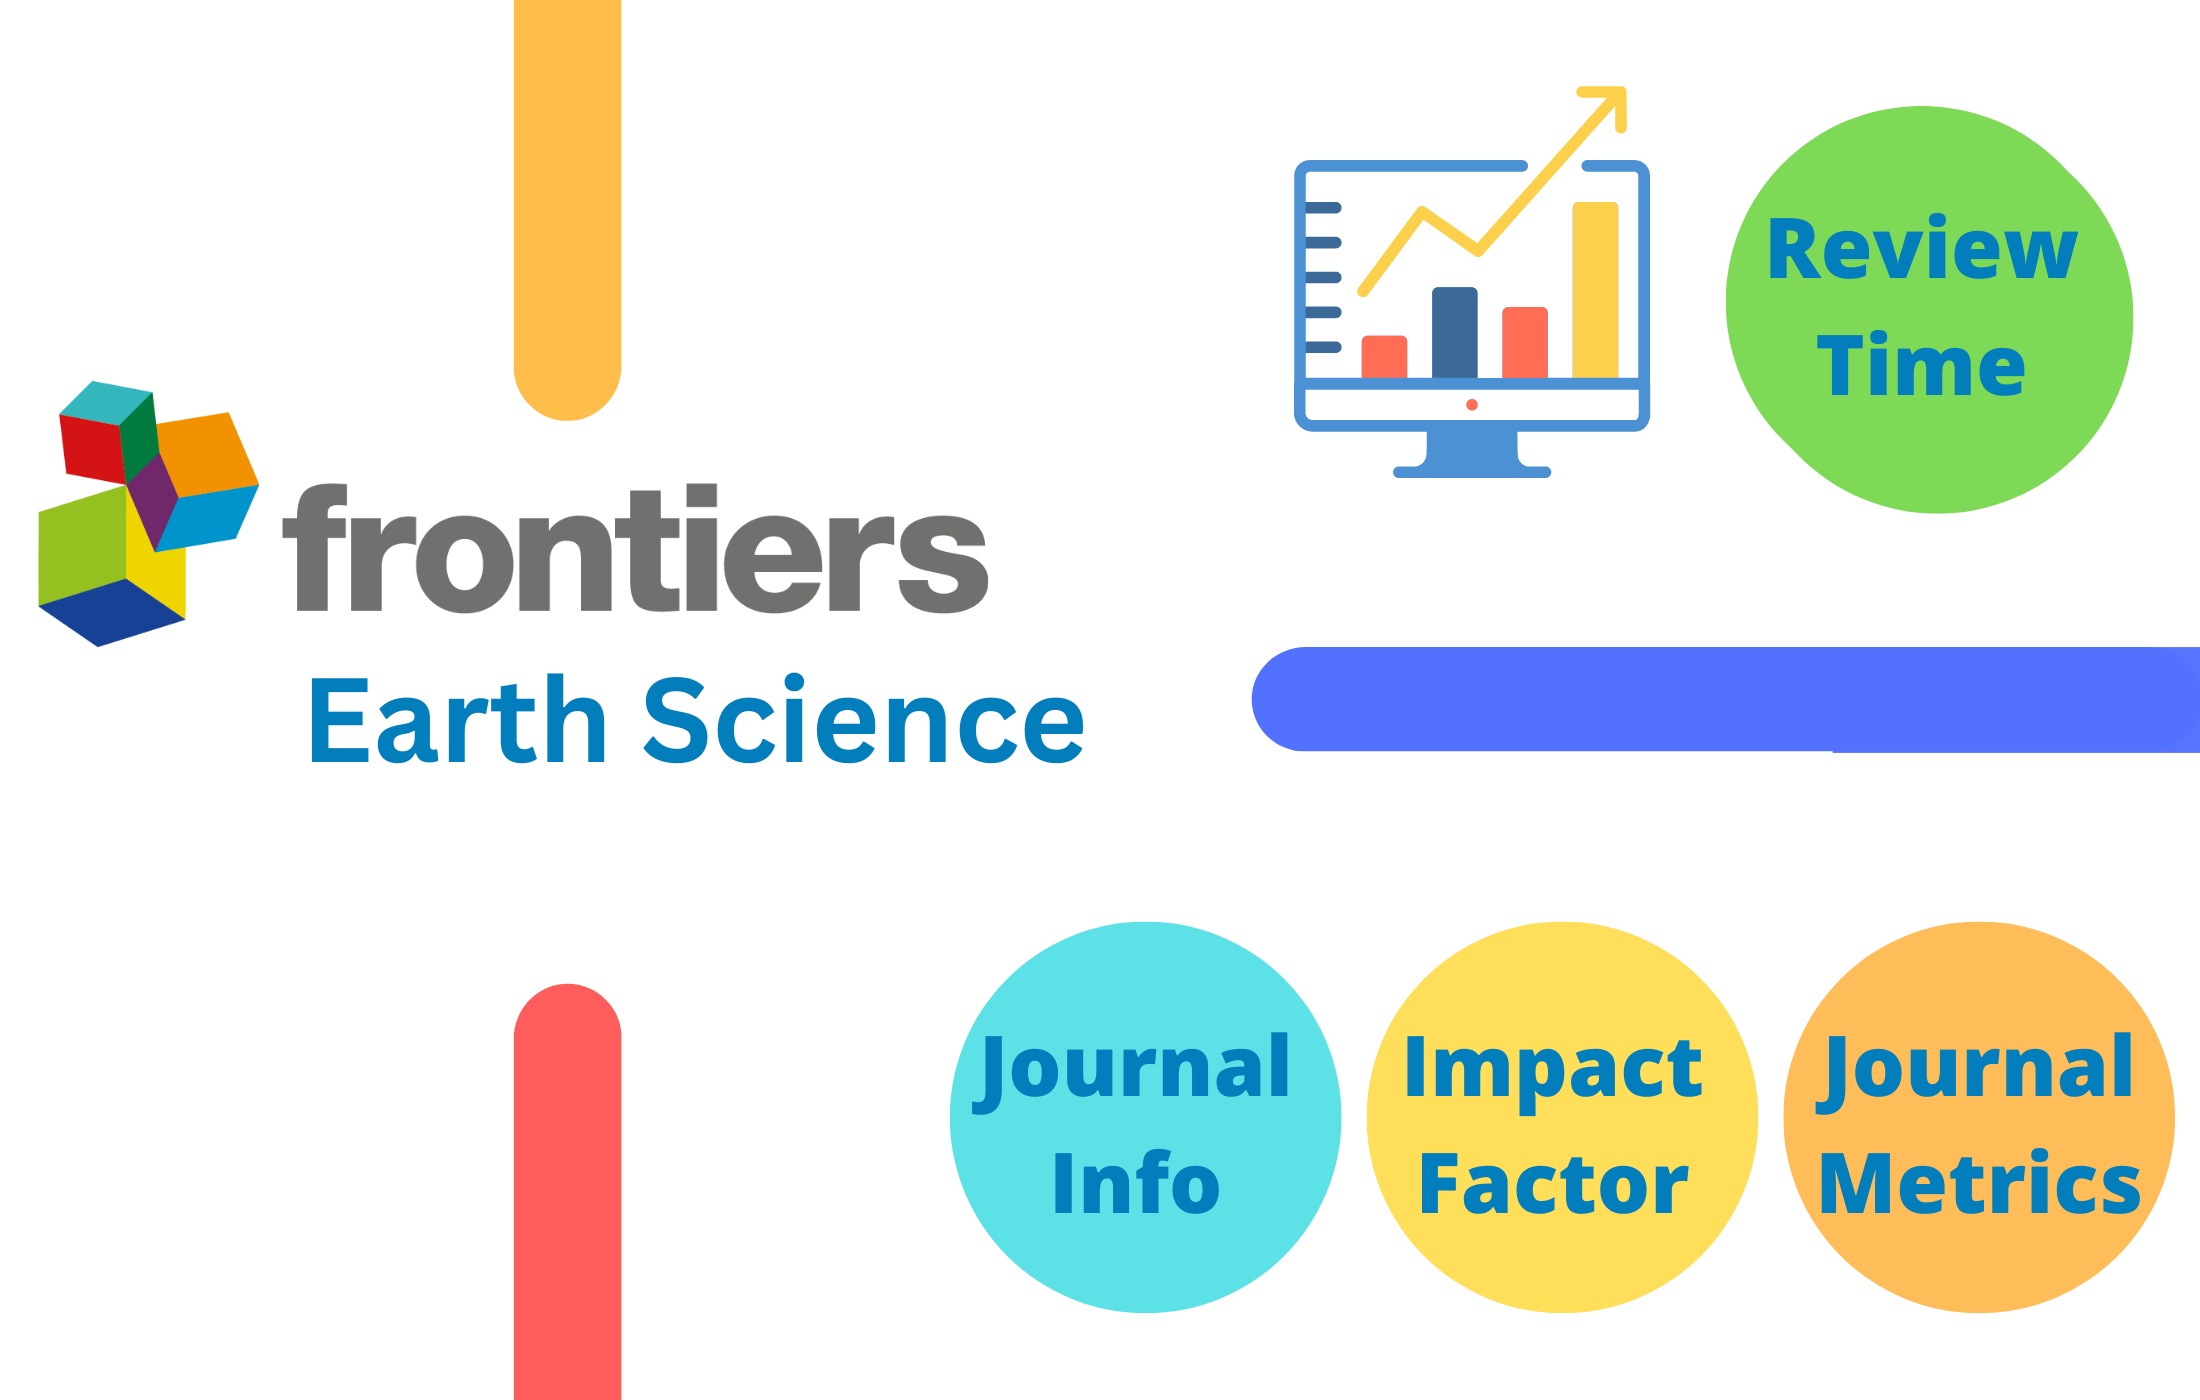 Frontiers in Earth Science Impact Factor